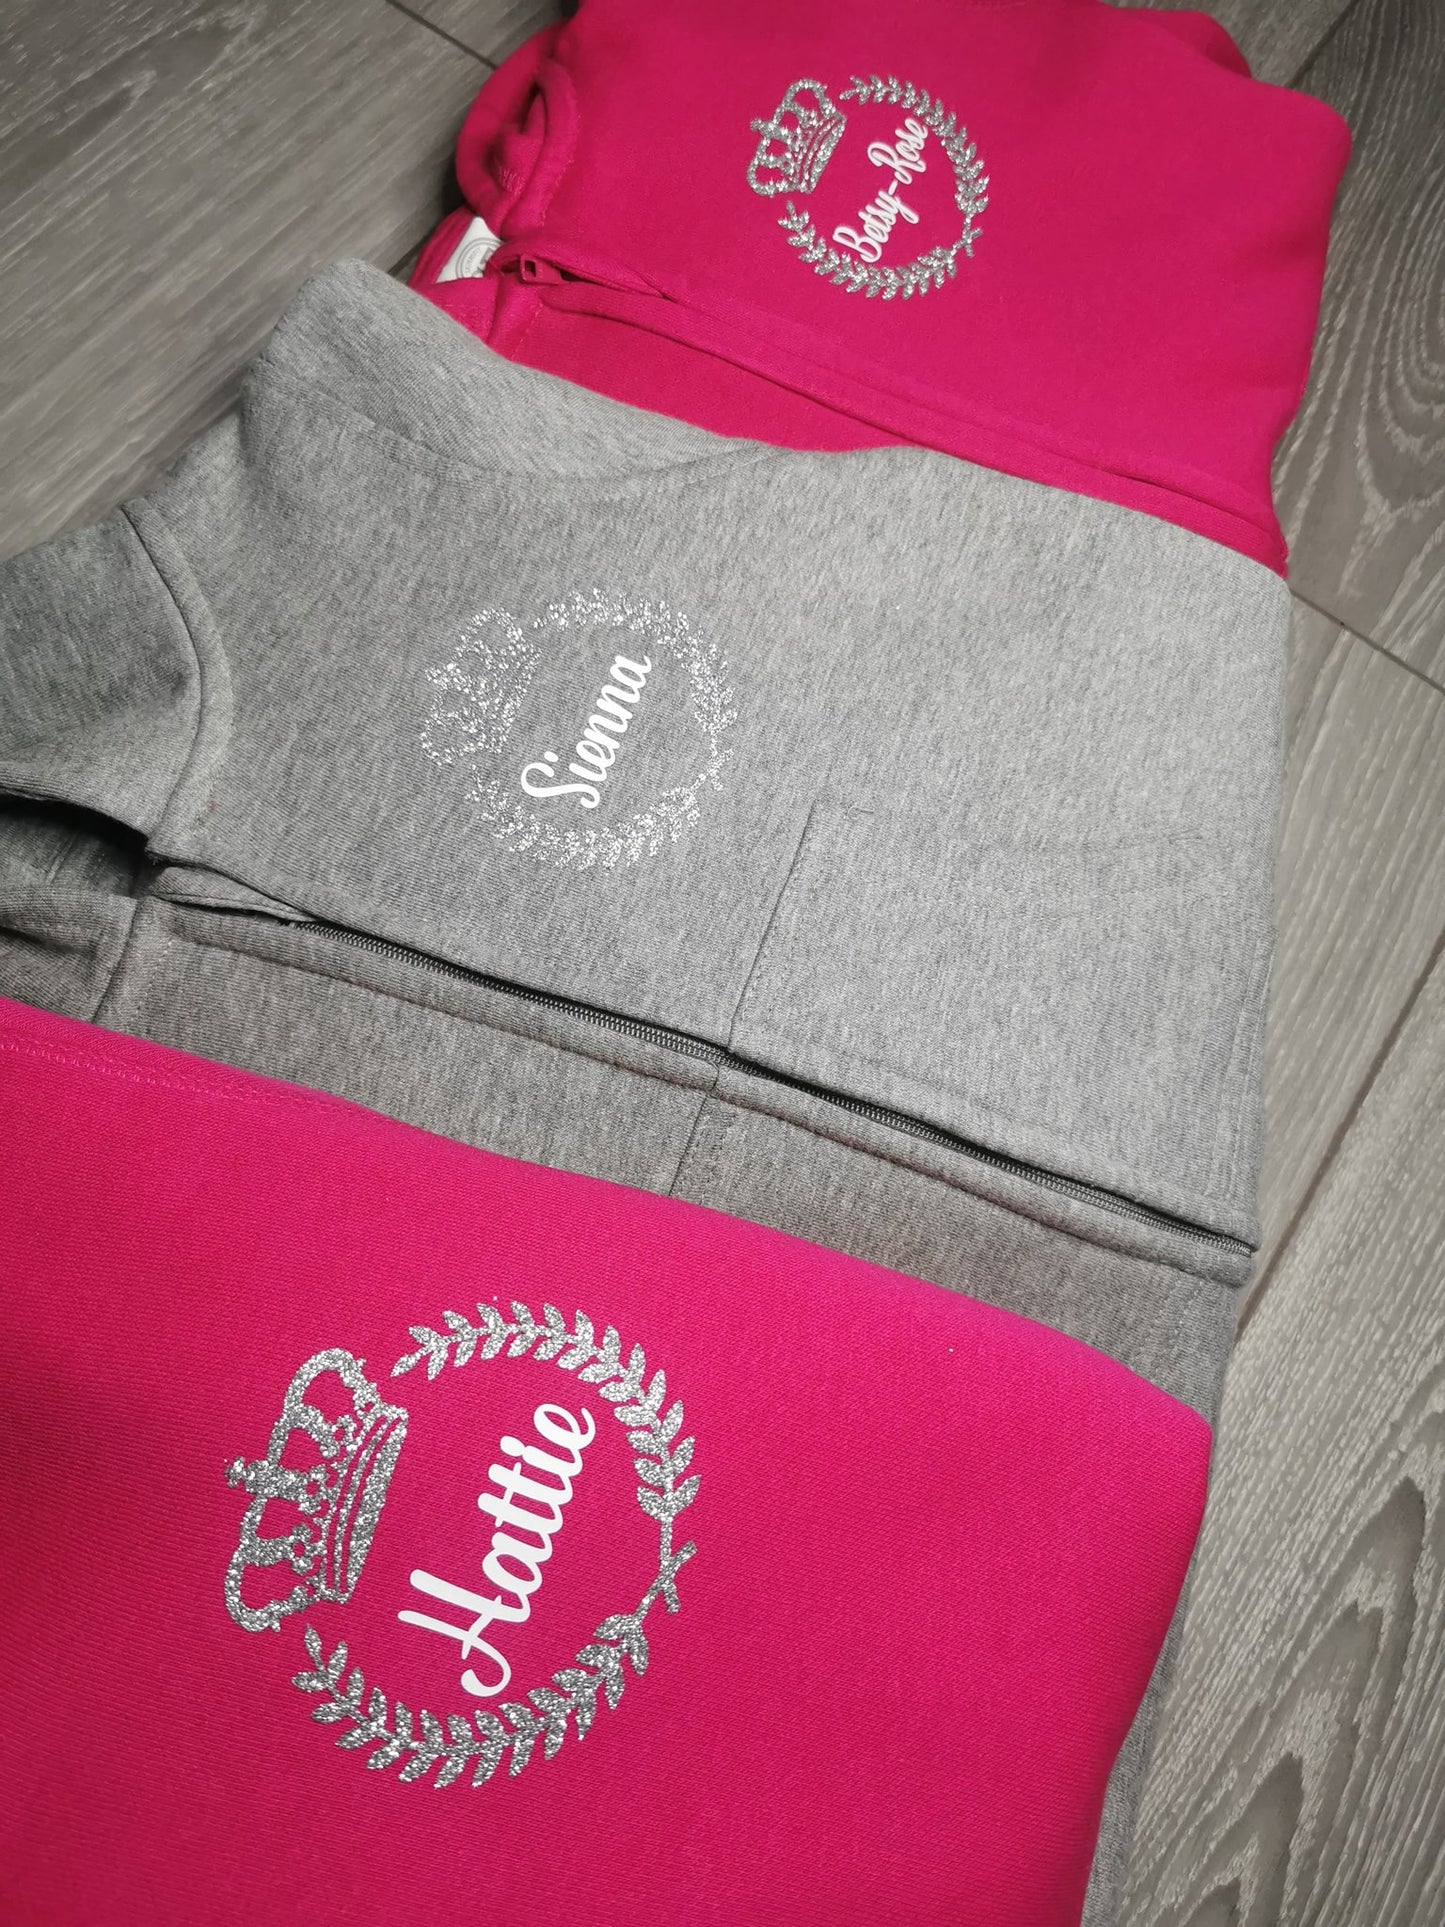 Personalised Fleece Onesie - Crown & Crest Name Design - Your colour choices!